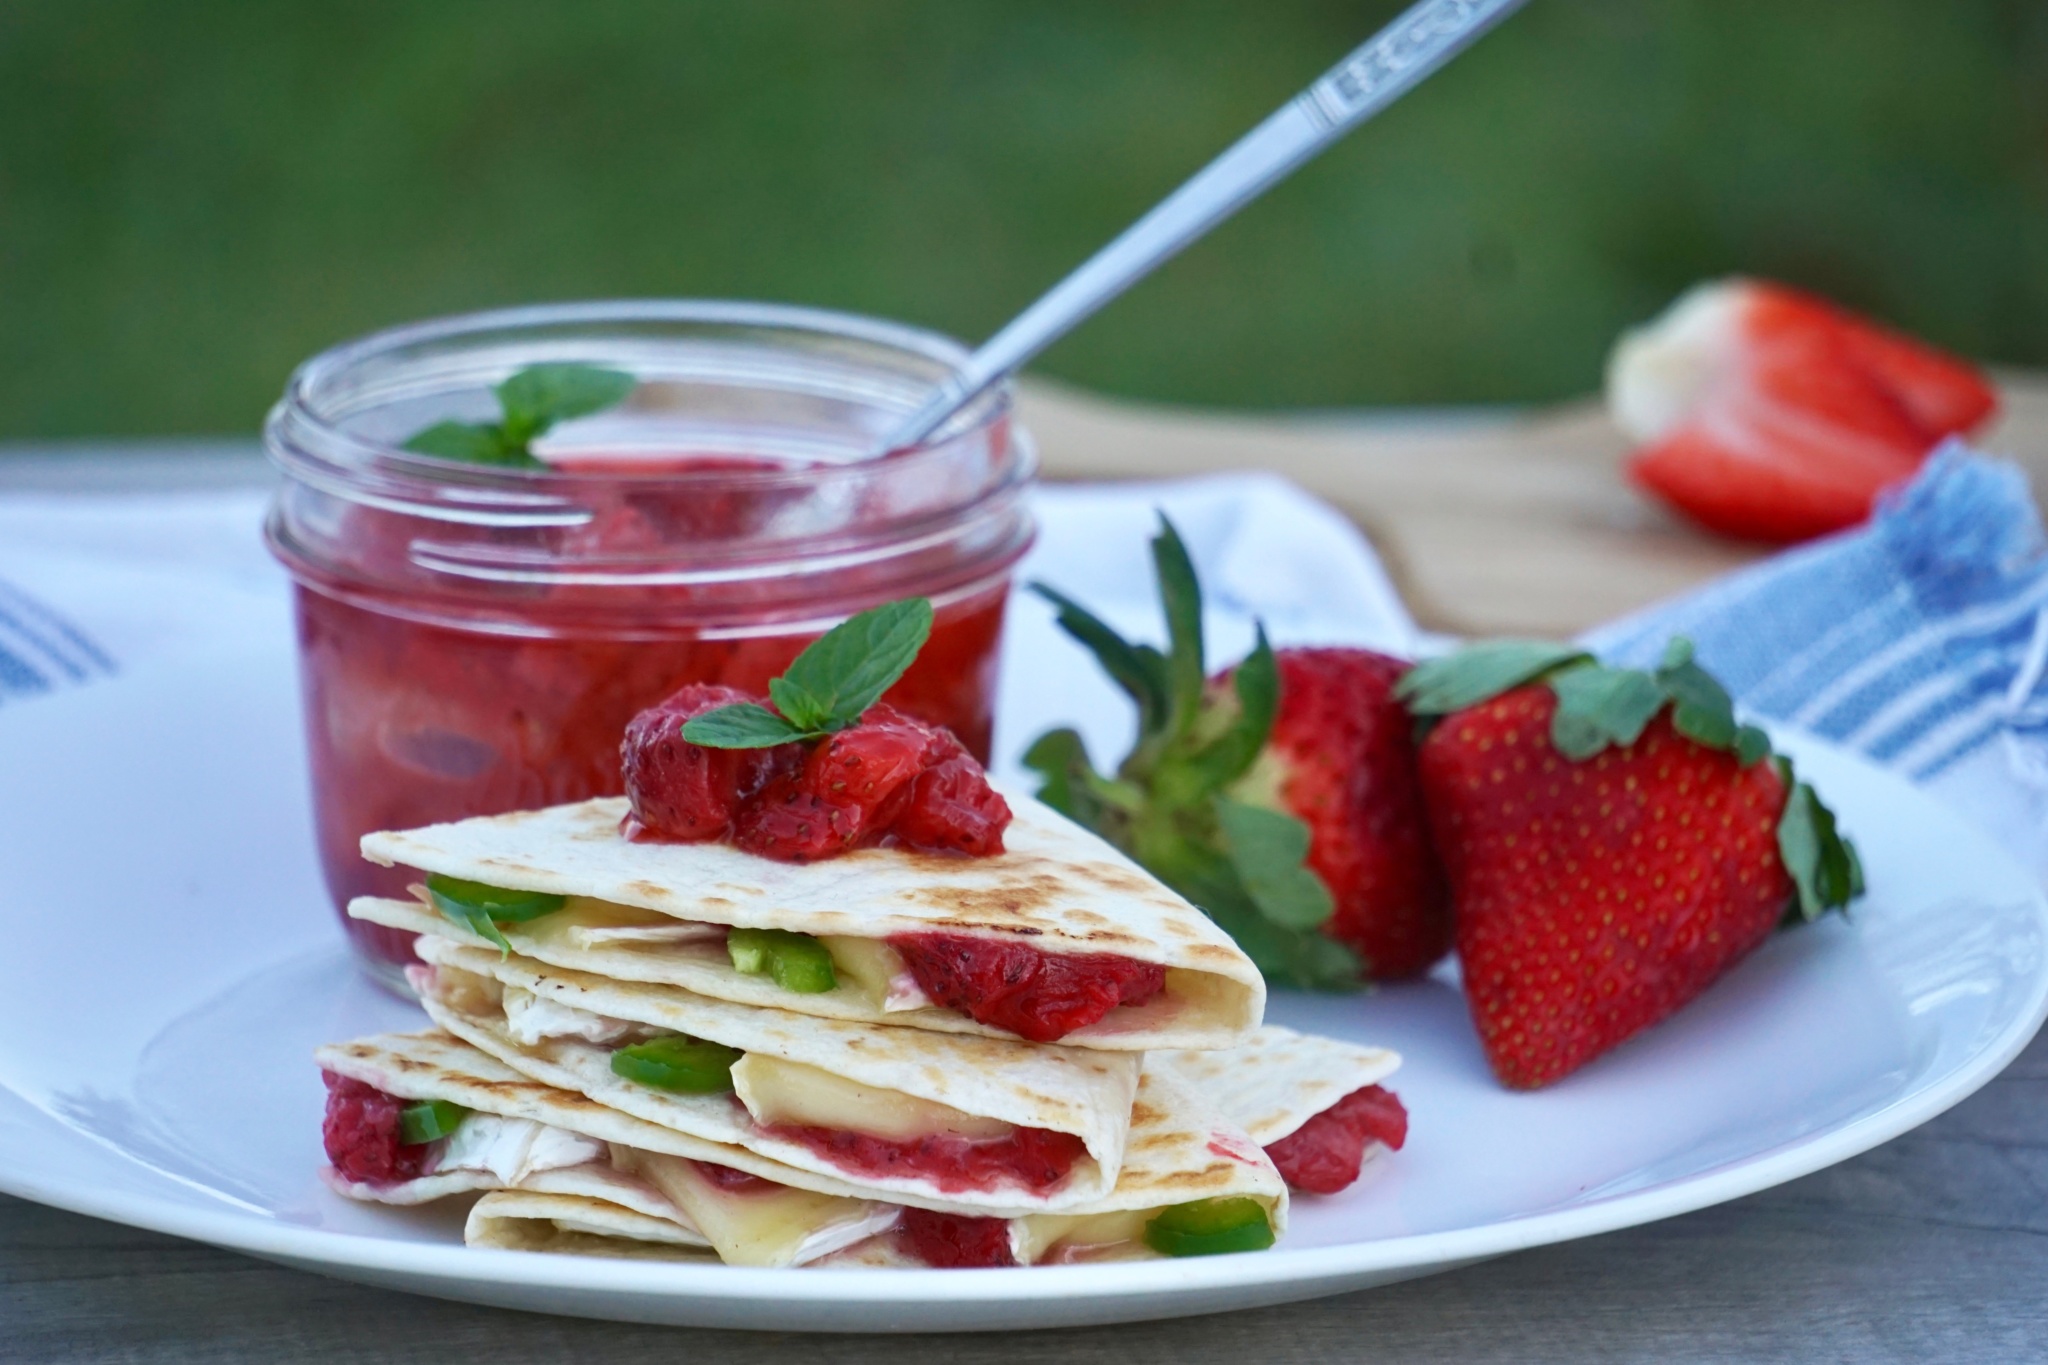 Brie and Strawberry Jalapeno Quesadillas